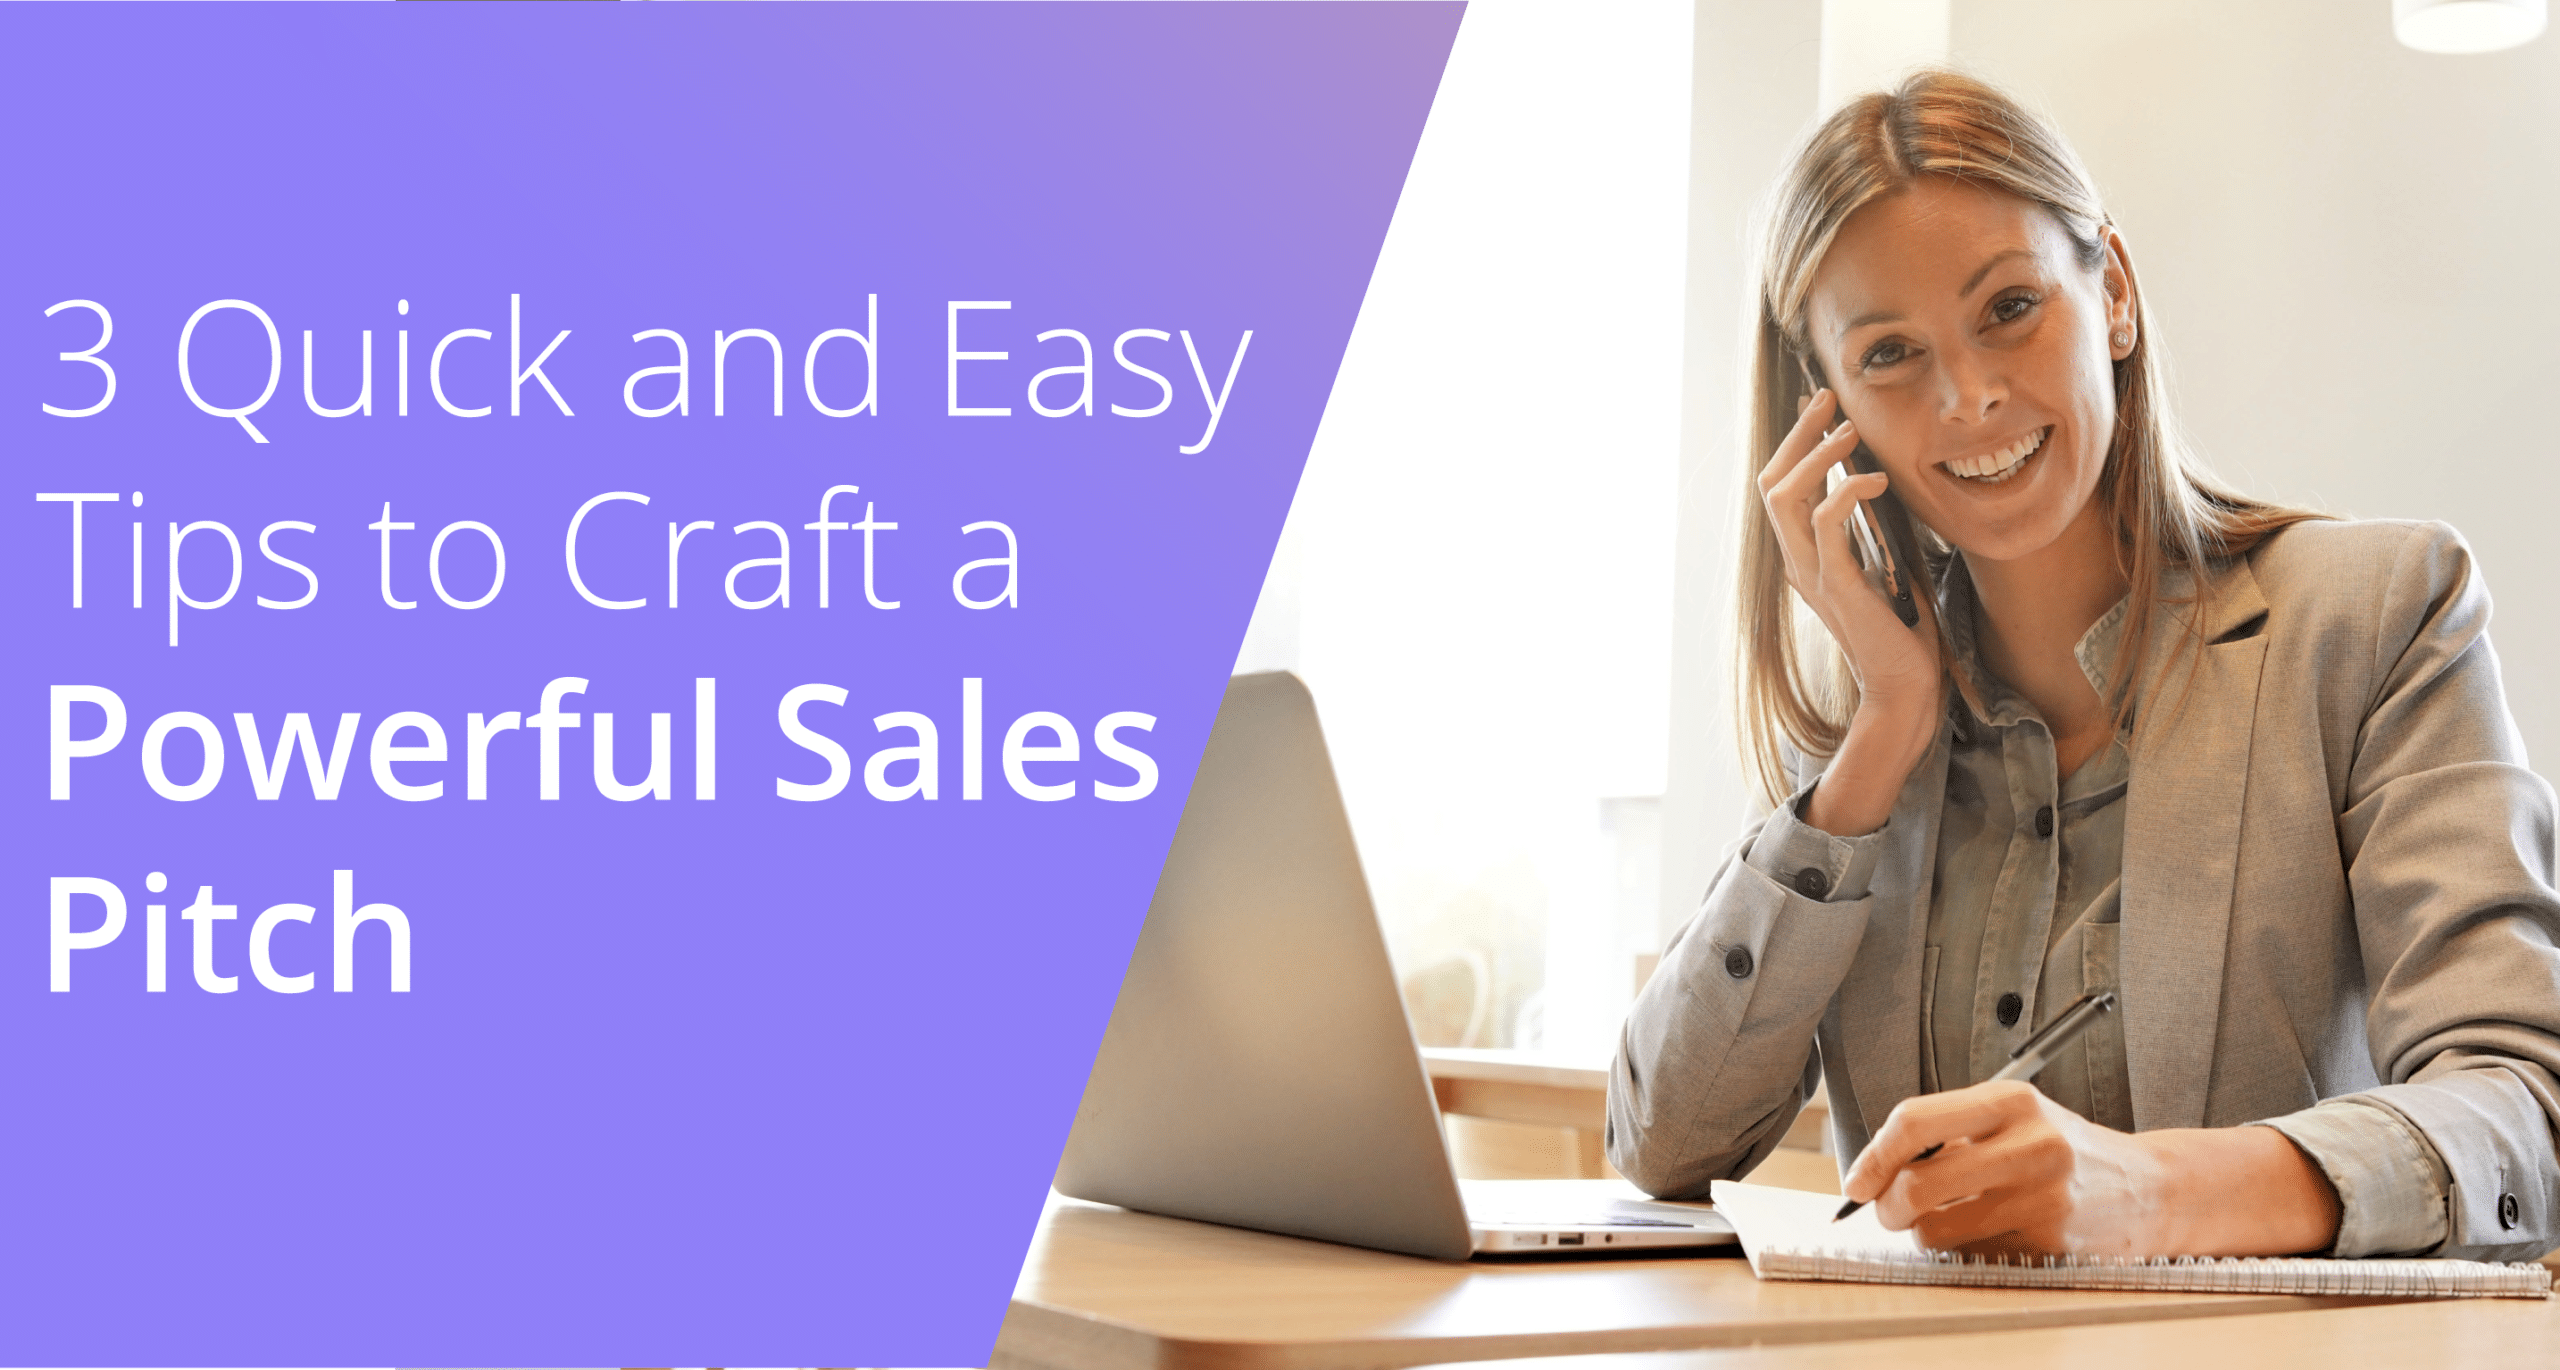 3 Quick and Easy Tips to Craft a Powerful Sales Pitch